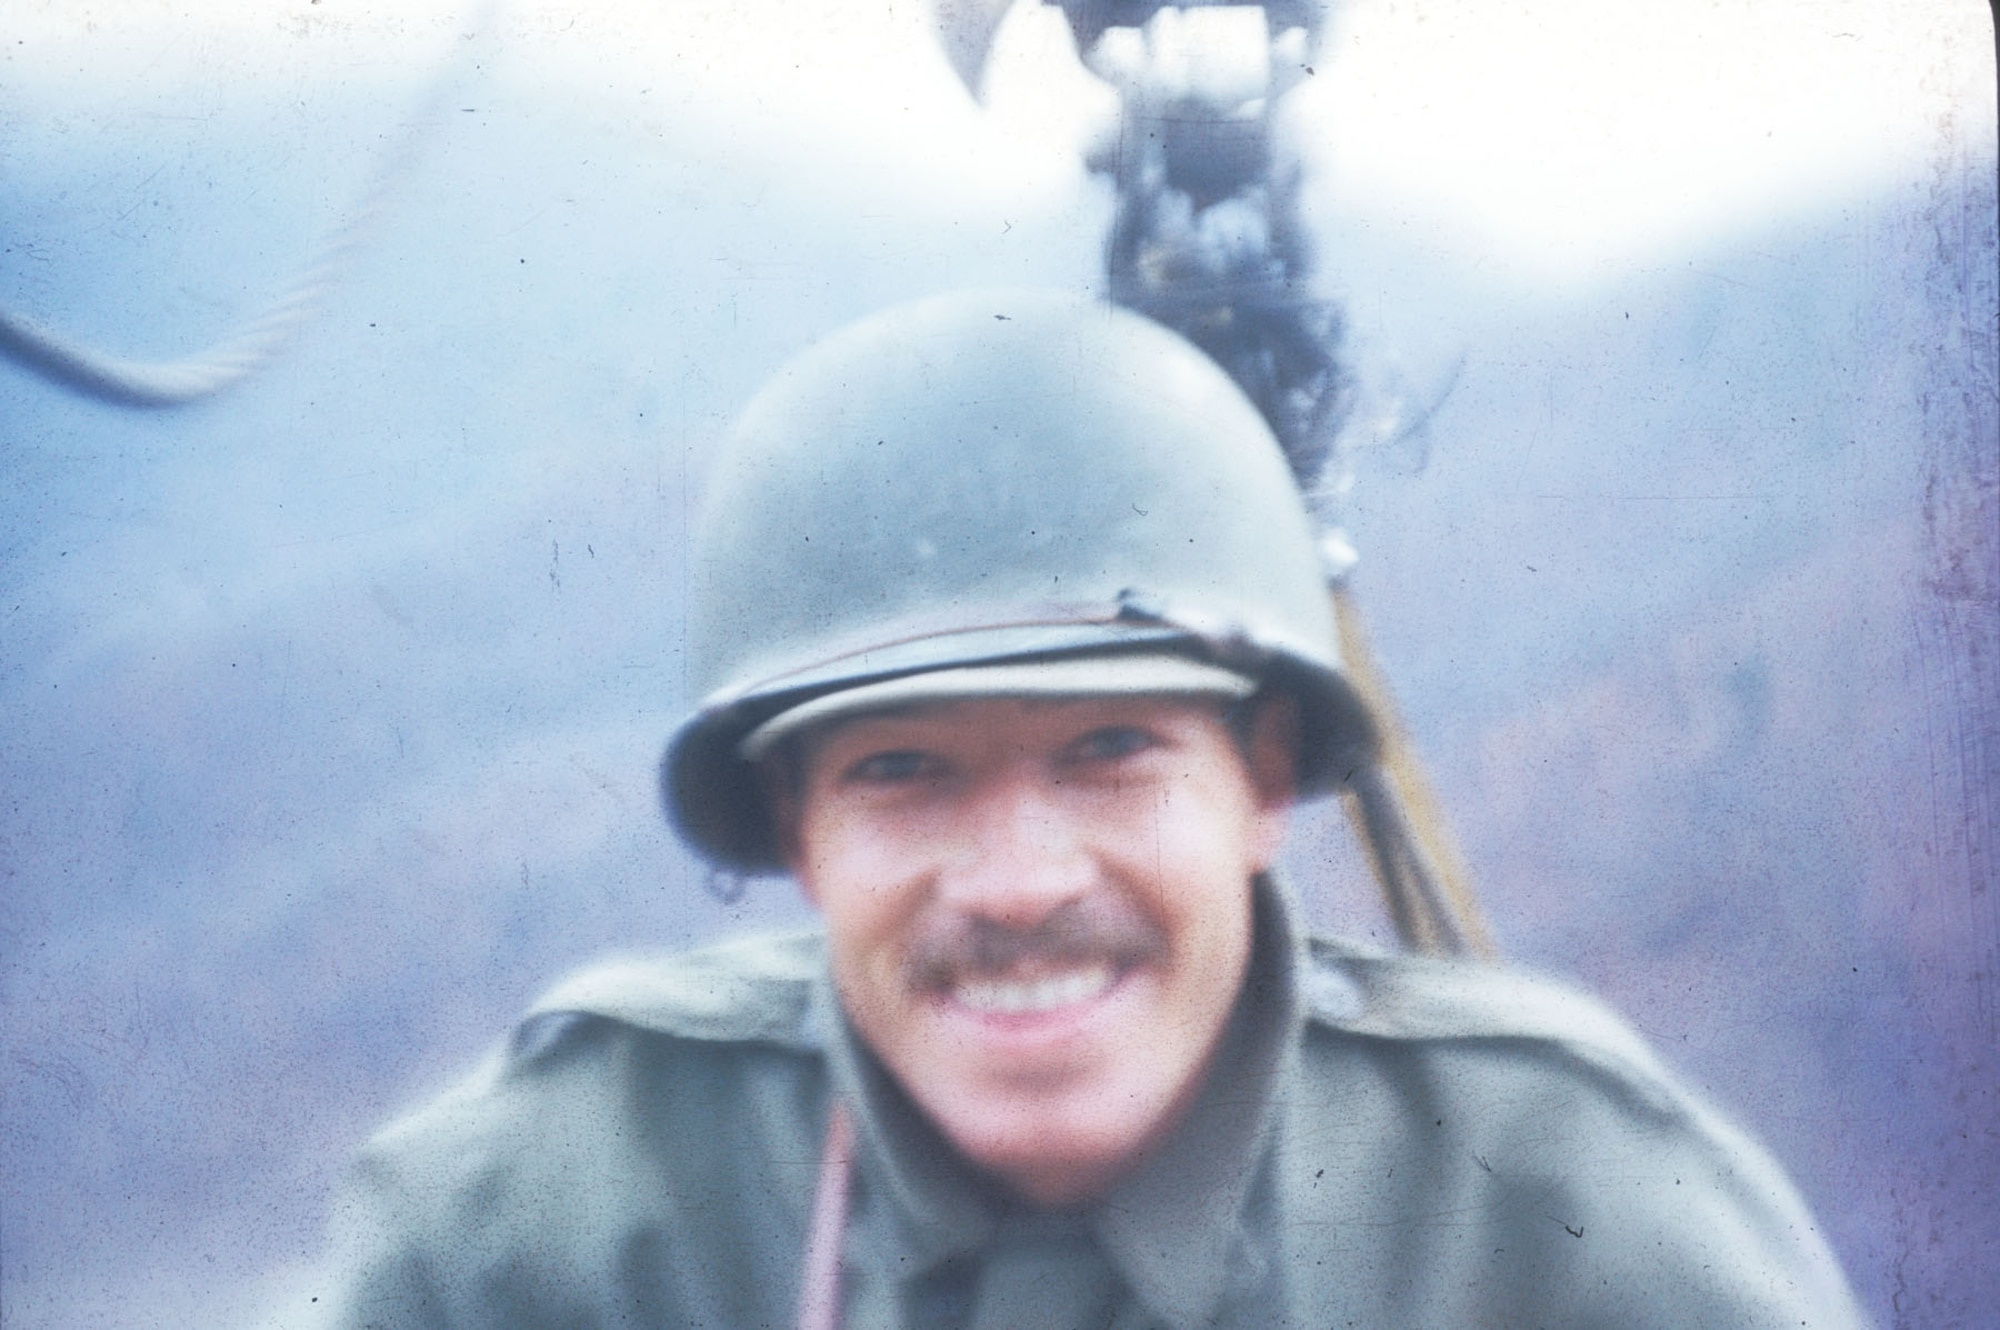 The smile on this TACP member belies the fact that he is dangling in mid-air on a 1/2-mile-long cable car wire, exposed to enemy artillery fire. It was the only practical way to reach a certain peak to control an airstrike. (U.S. Air Force photo)